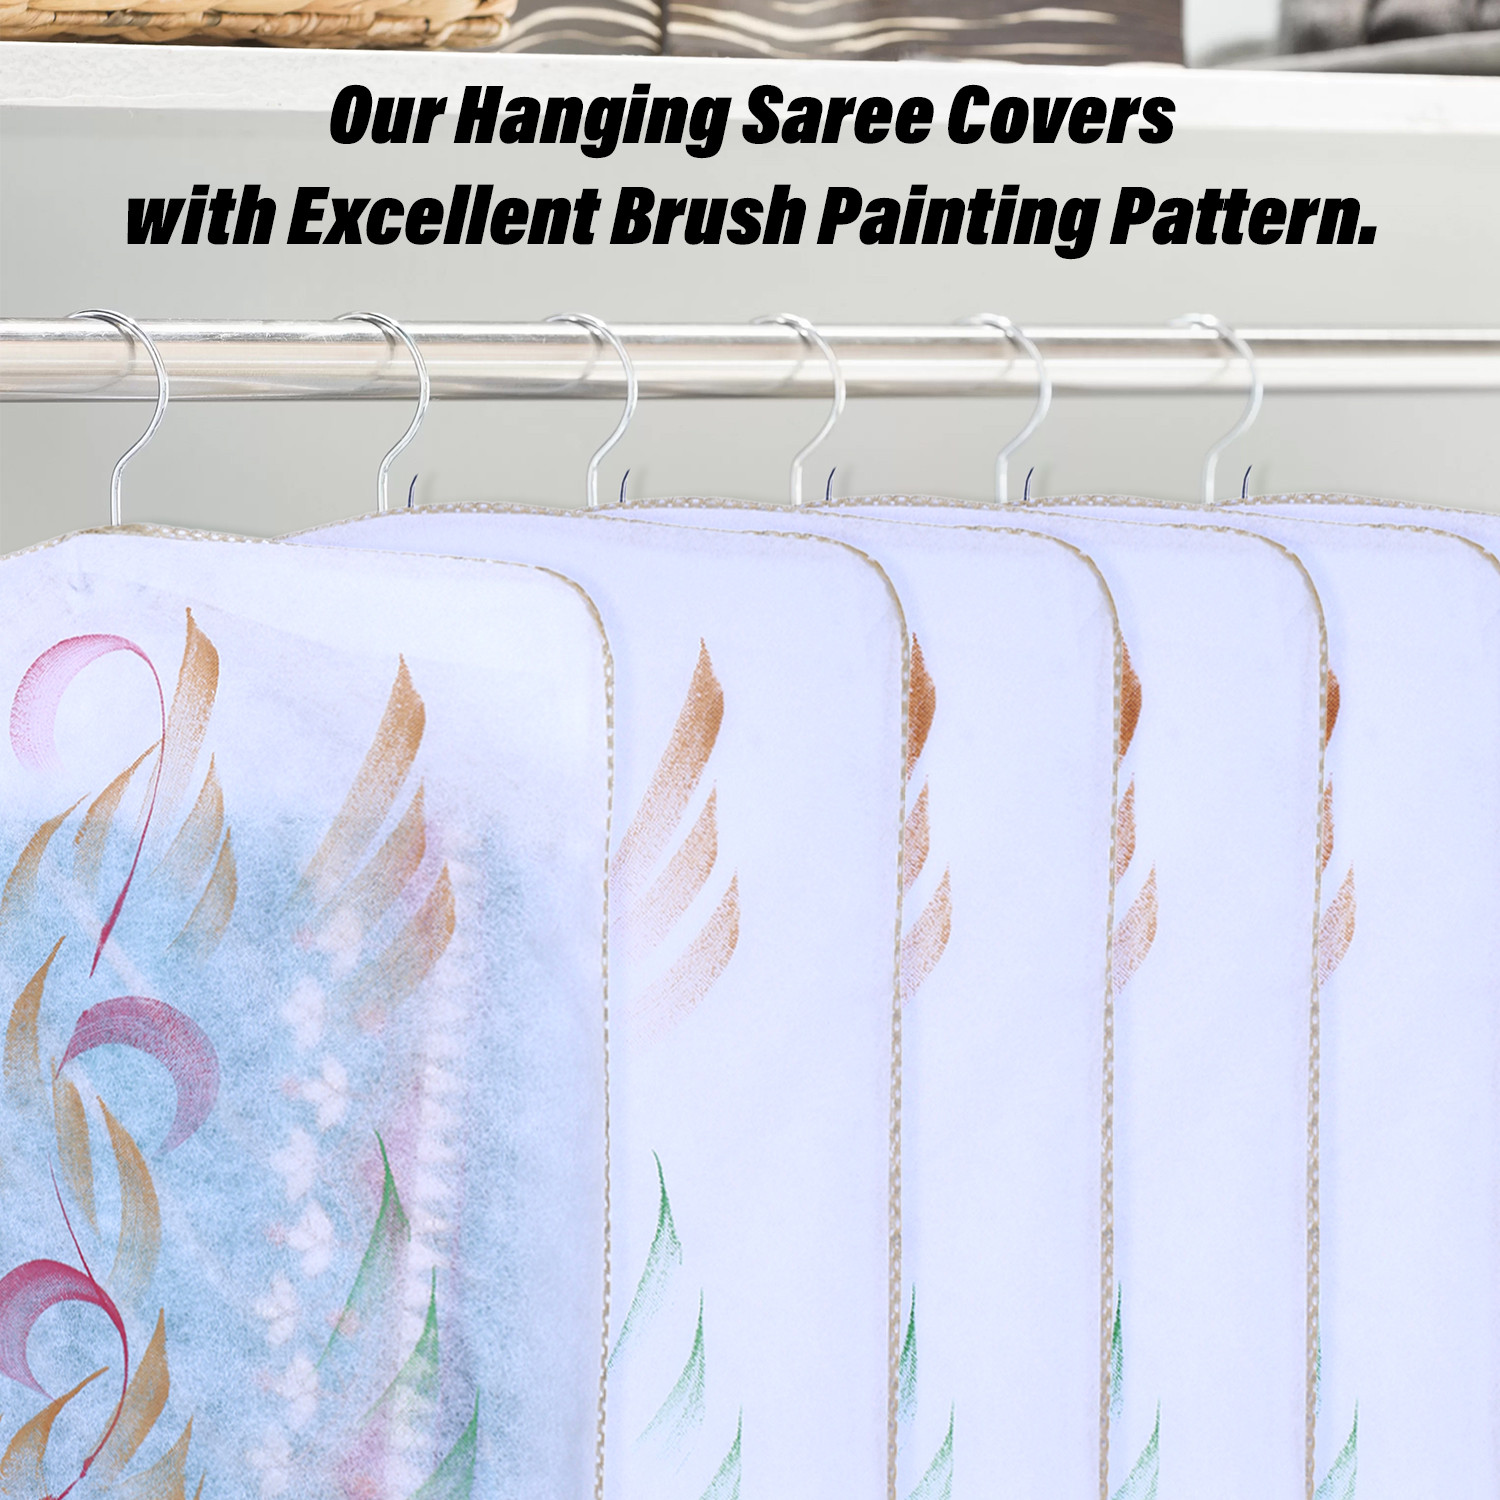 Kuber Industries Hanging Saree Cover | Brush Painting Pattern Saree Cover | Non-Woven Saree Covers for Home | Saree Cover with Small Transparent view |  Golden